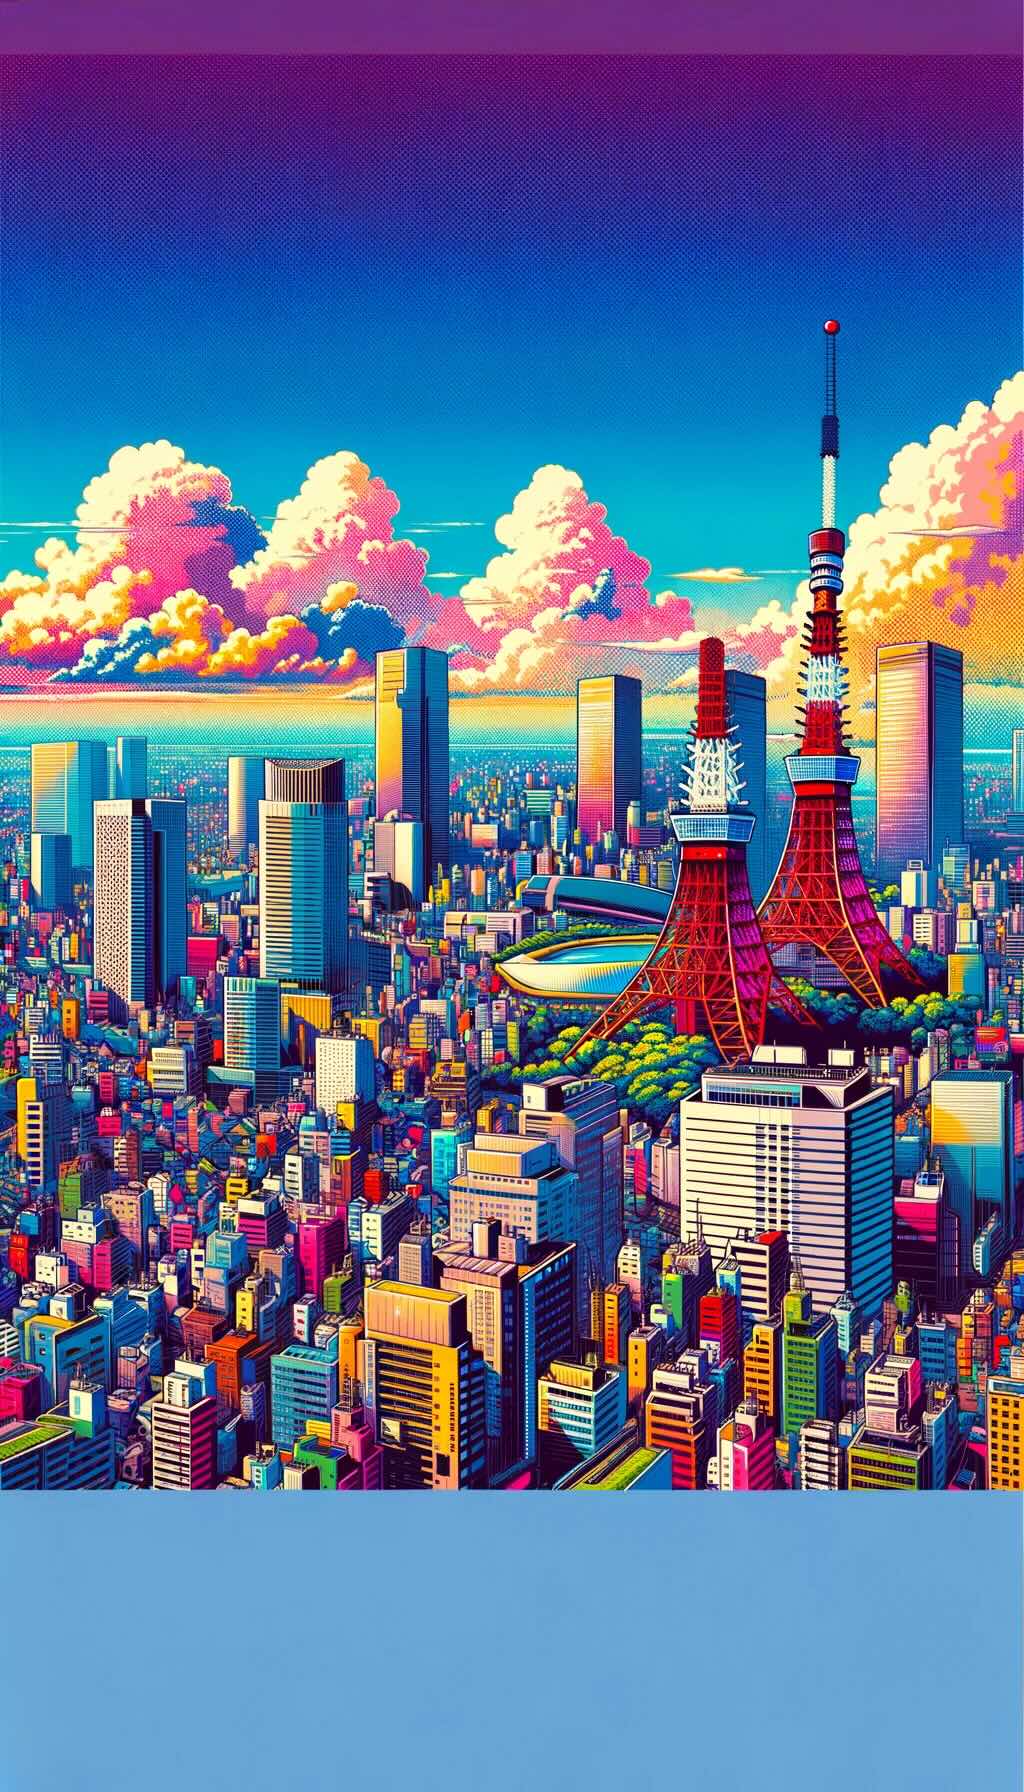 Best views of Tokyo's skyline depicts vibrant and colorful scenes of Tokyo from various vantage points, highlighting iconic landmarks and the modern atmosphere of the city.